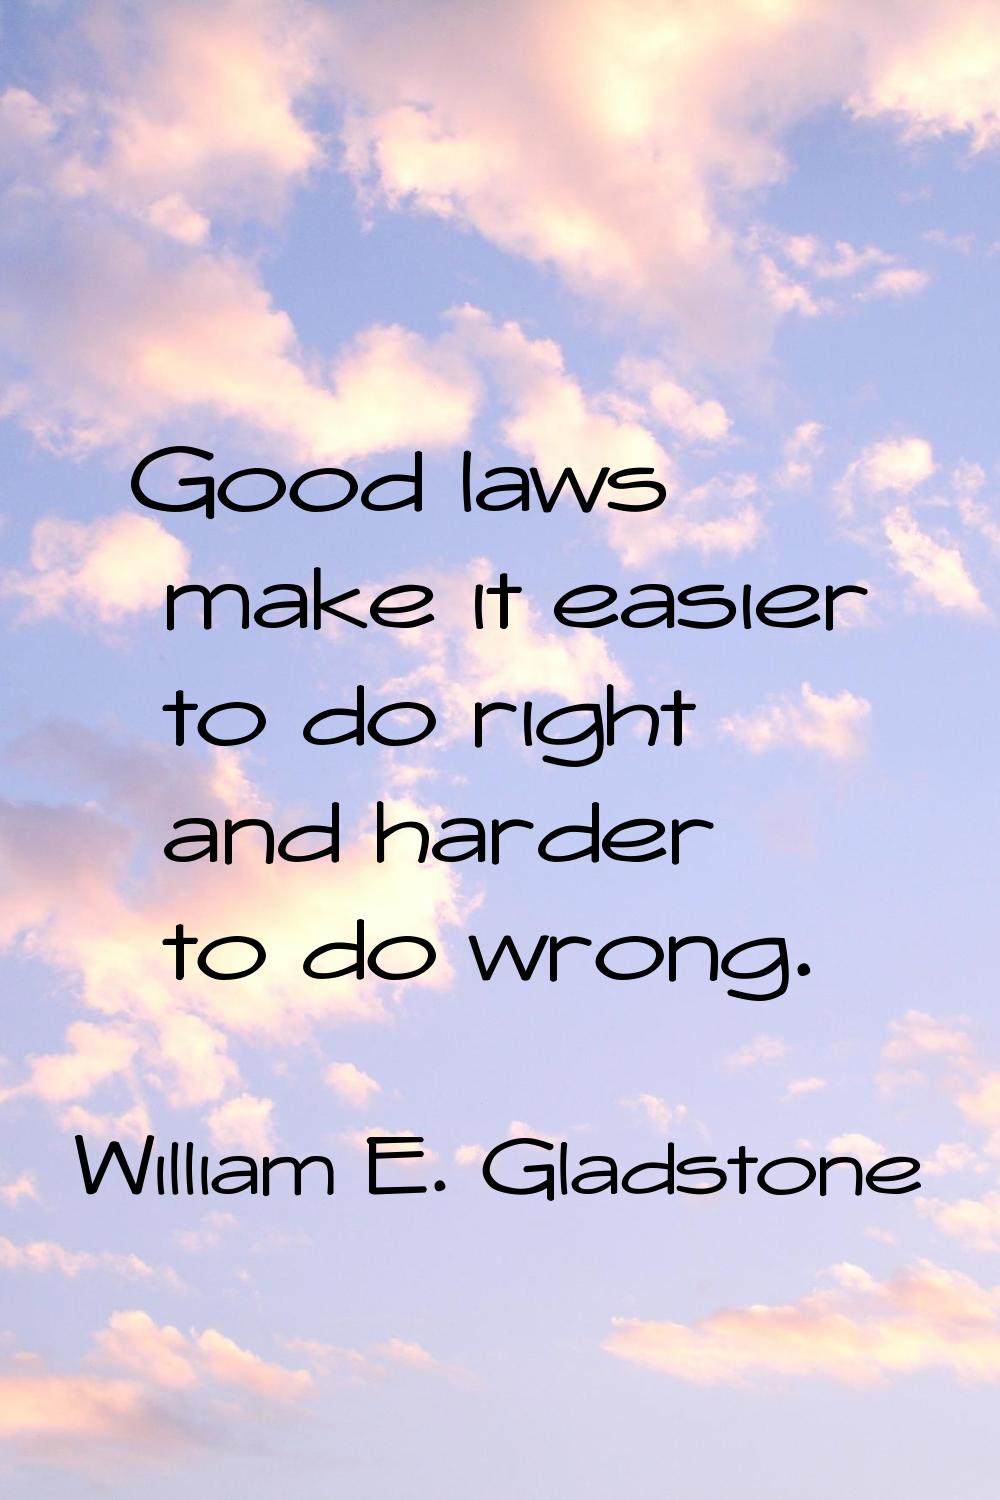 Good laws make it easier to do right and harder to do wrong.